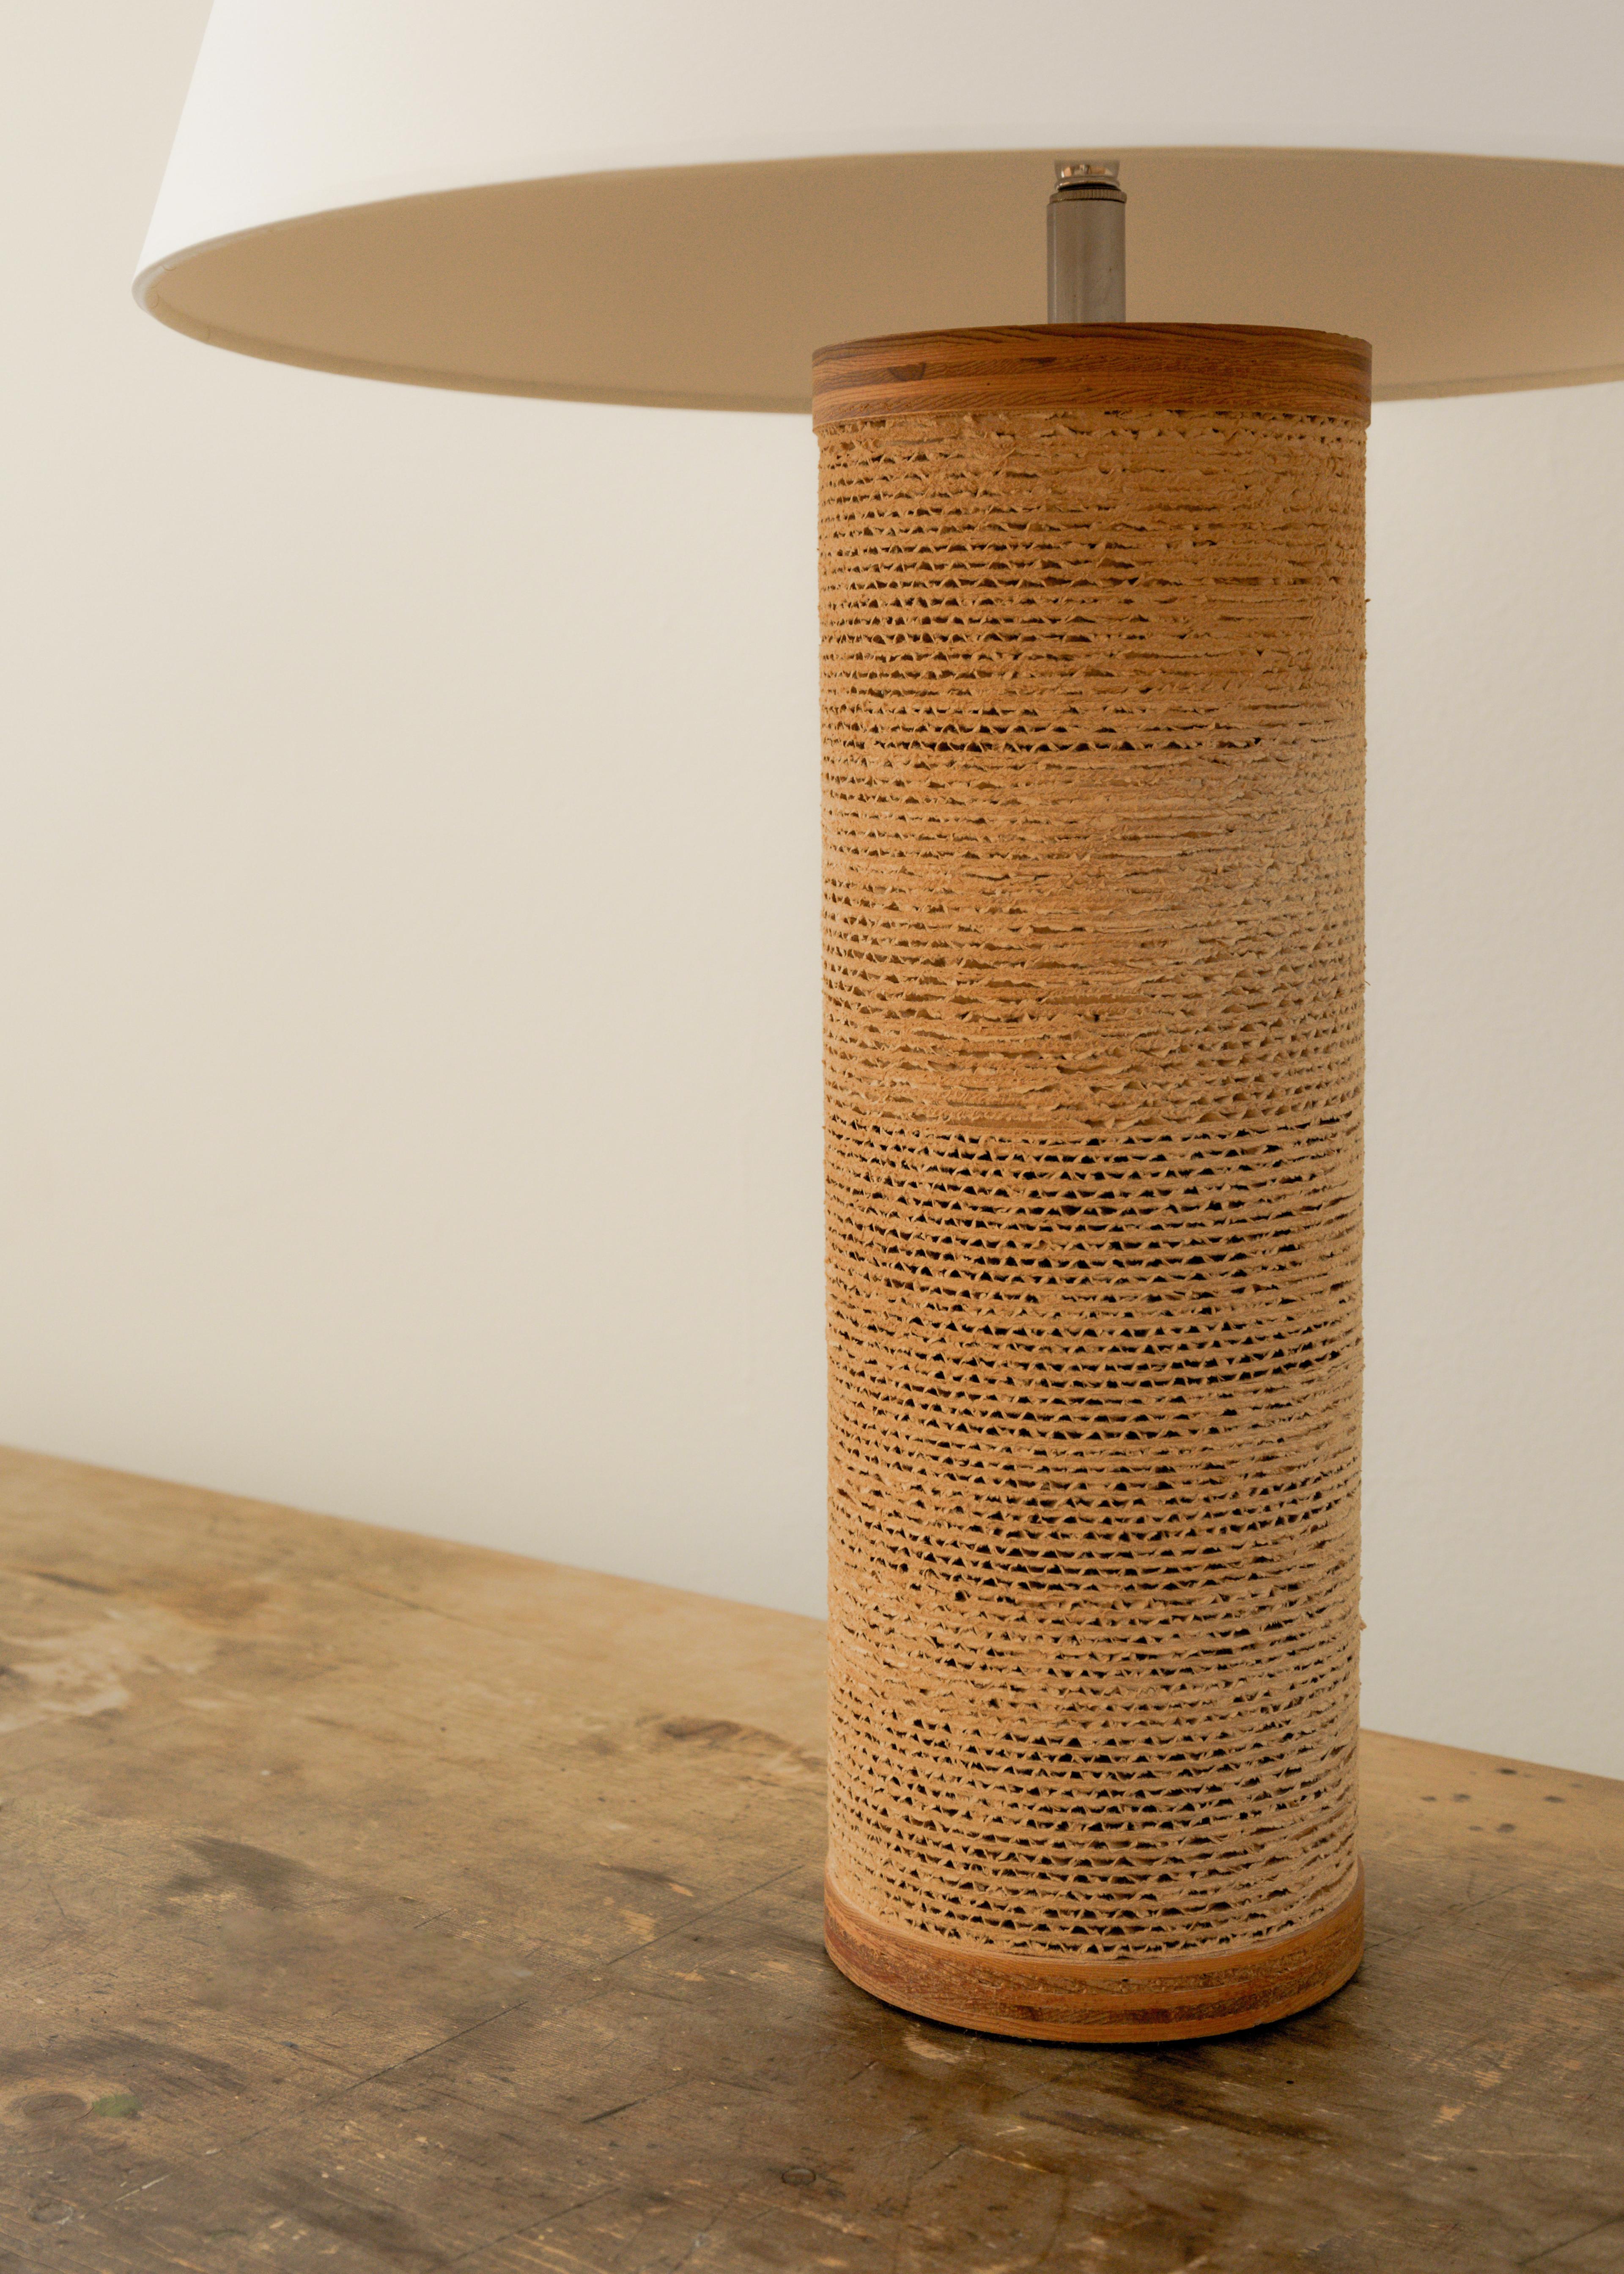 Corrugated cardboard base table lamp by Gregory Van Pelt, new wiring and shade, U.S., circa 1970's.